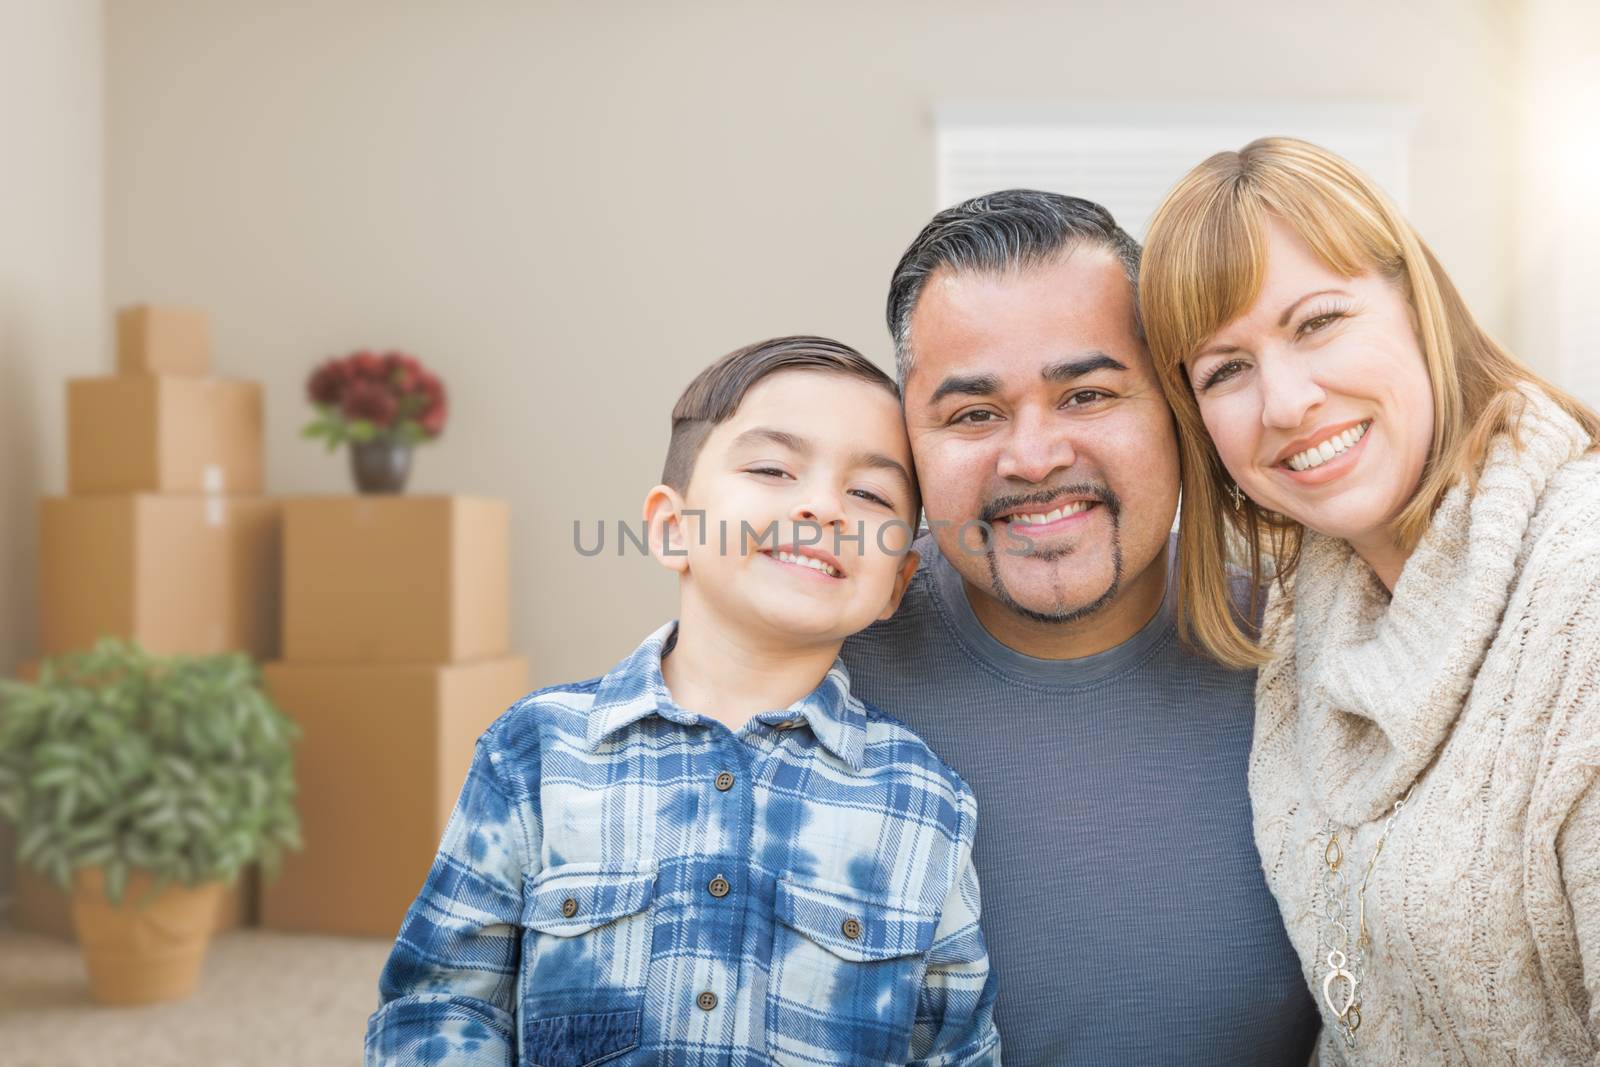 Mixed Race Family In Empty Room With Moving Boxes and Plants. by Feverpitched